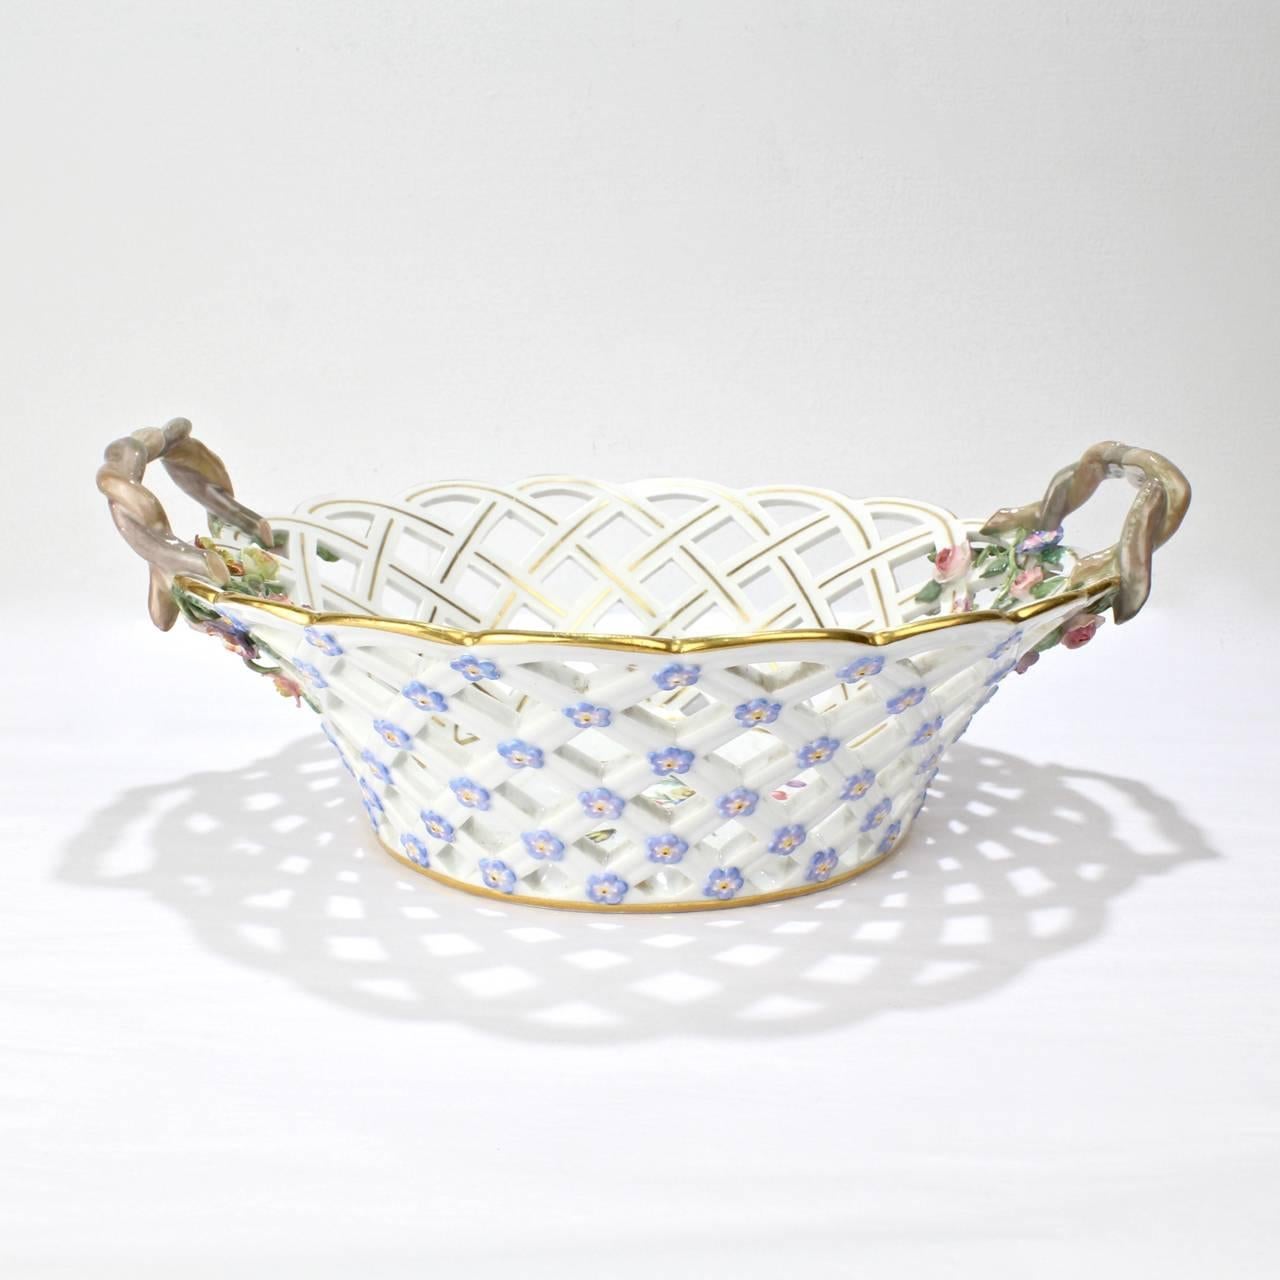 Rococo Antique 19th Century Meissen Porcelain Reticulated Fruit Basket with Flowers